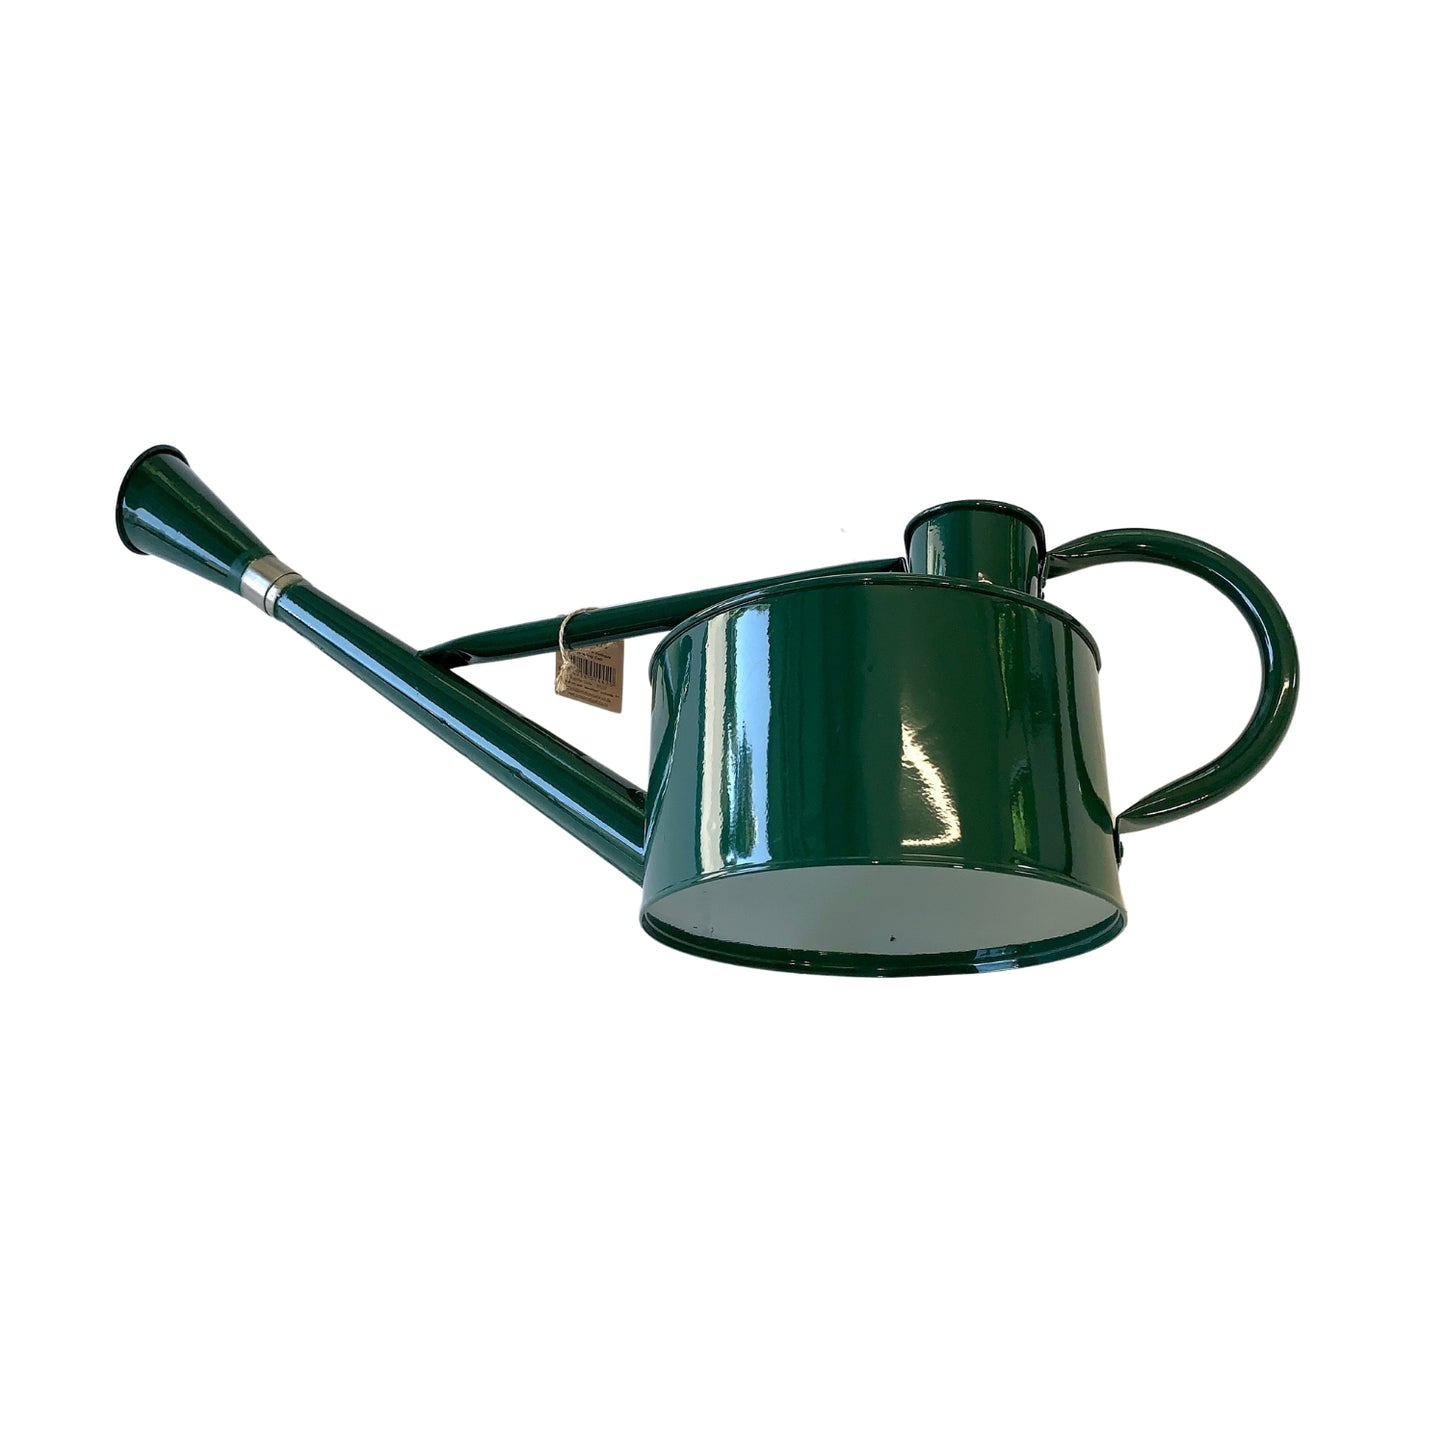 OMNI 5.2 LITRE ANTIQUE WATERING CAN - WC52